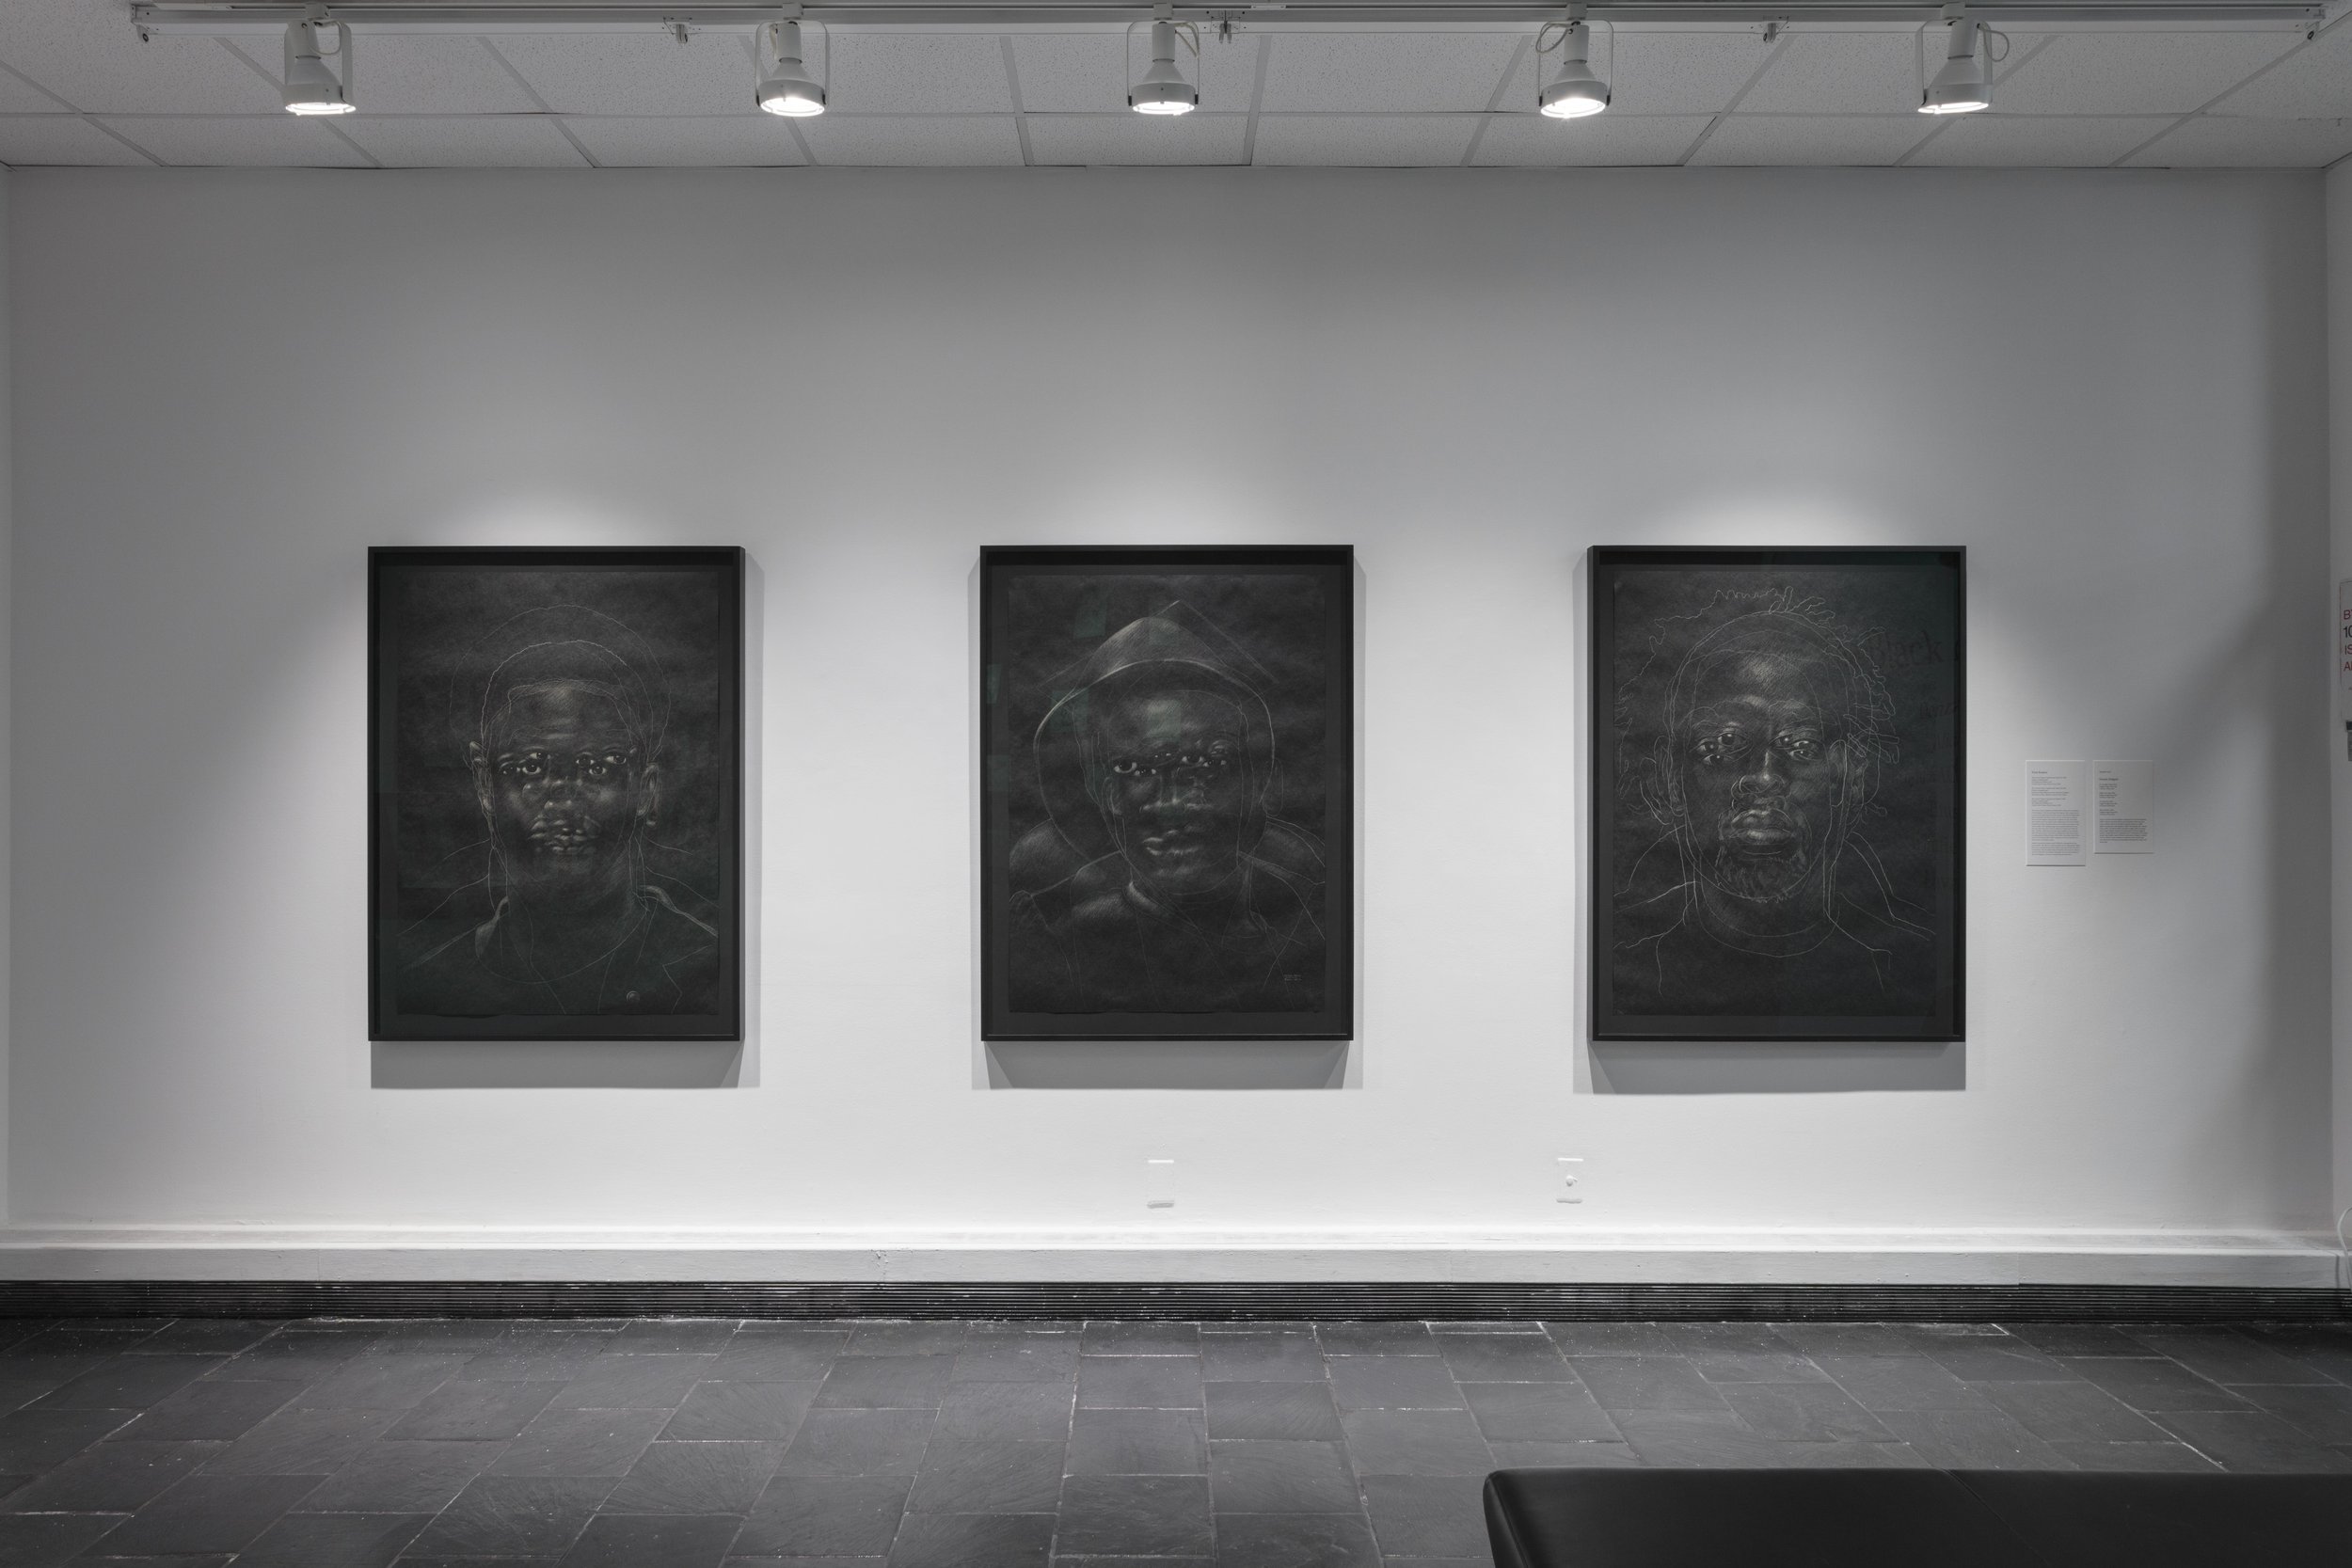  Installation view of  The Black Index  at Hunter College Art Galleries’ Leubsdorf Gallery, 2022. Photo: Stan Narten. Works by Titus Kaphar, left to right:  The Jerome Project (Asphalt and Chalk) XV , 2015. Chalk on asphalt paper, 49 x 36 inches. The